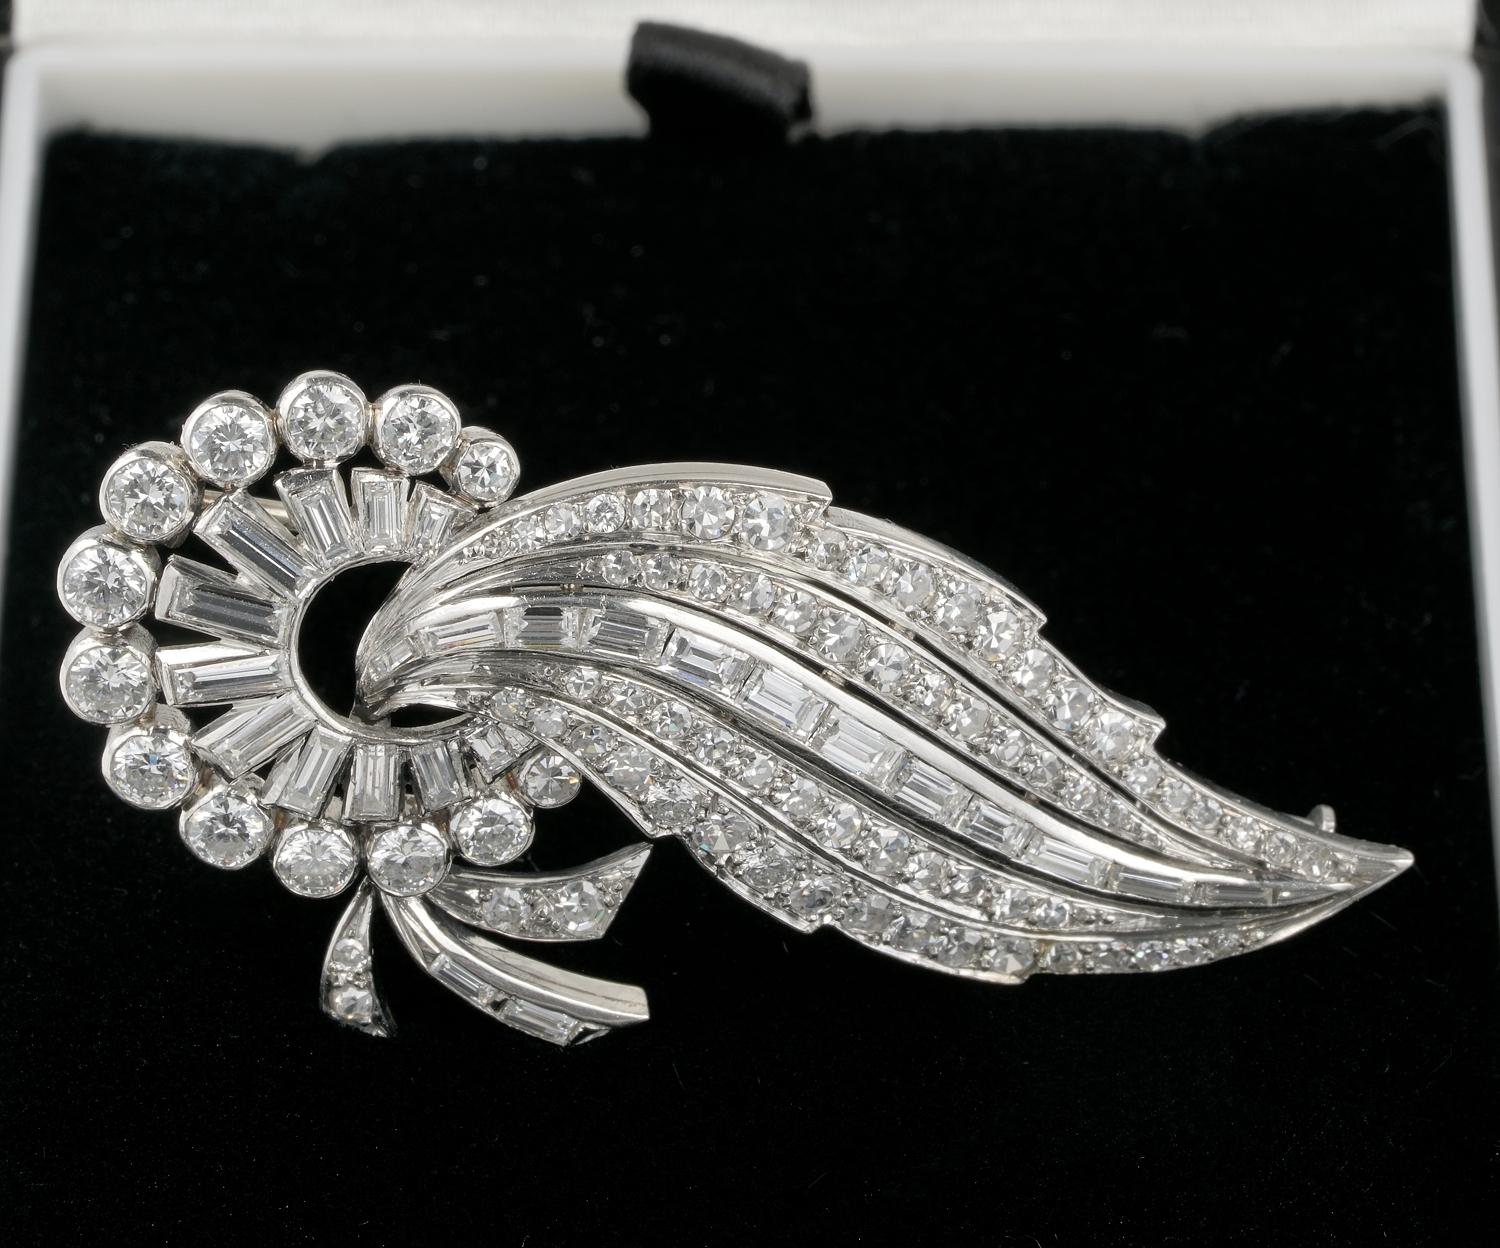 Shine At Christmas

Impressive late Art Deco dazzling Comet brooch
1935 ca 
Amazing artwork skilfully hand made to attract the attention from far away
Comet design was very popular during the Deco era, this is a good example of that age, entirely